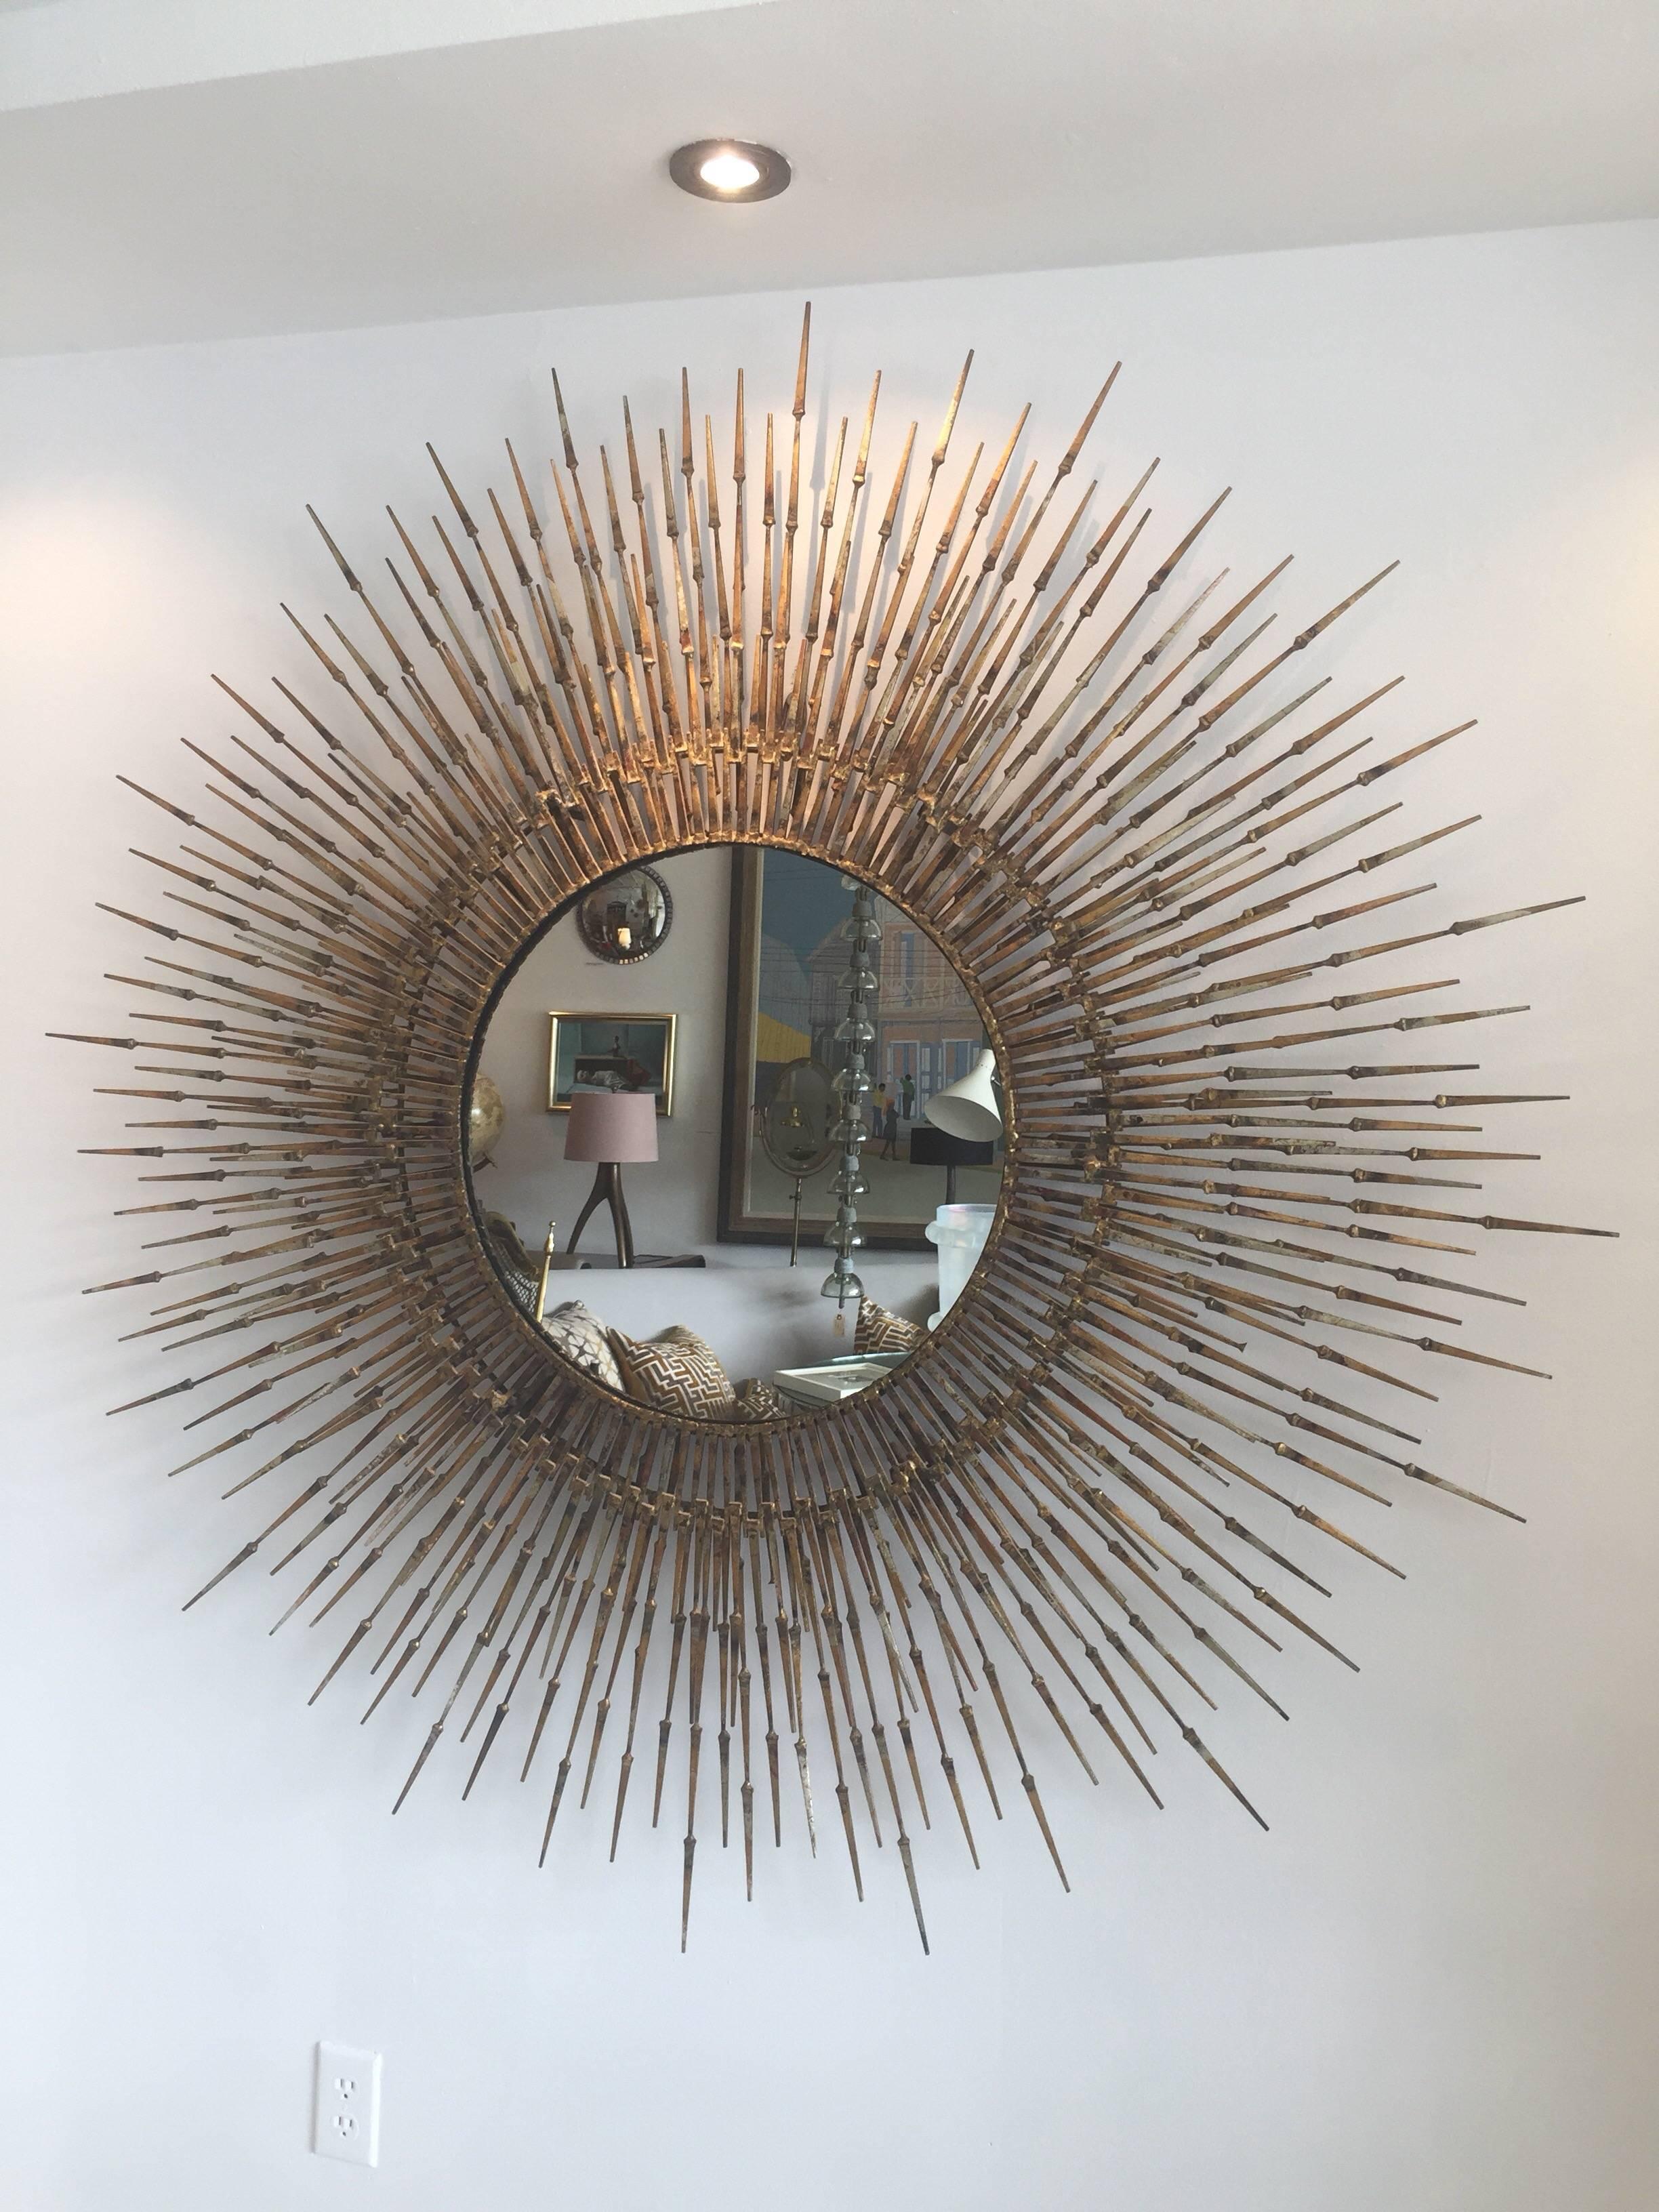 American post-war design gilt metal wall sunburst by William Bowie, circa 1970s.

This is a massive sculptural mirror with hundreds of arms on two levels. Wonderful vintage condition and a stunning statement to any decor.

Measures: 5 feet diameter.